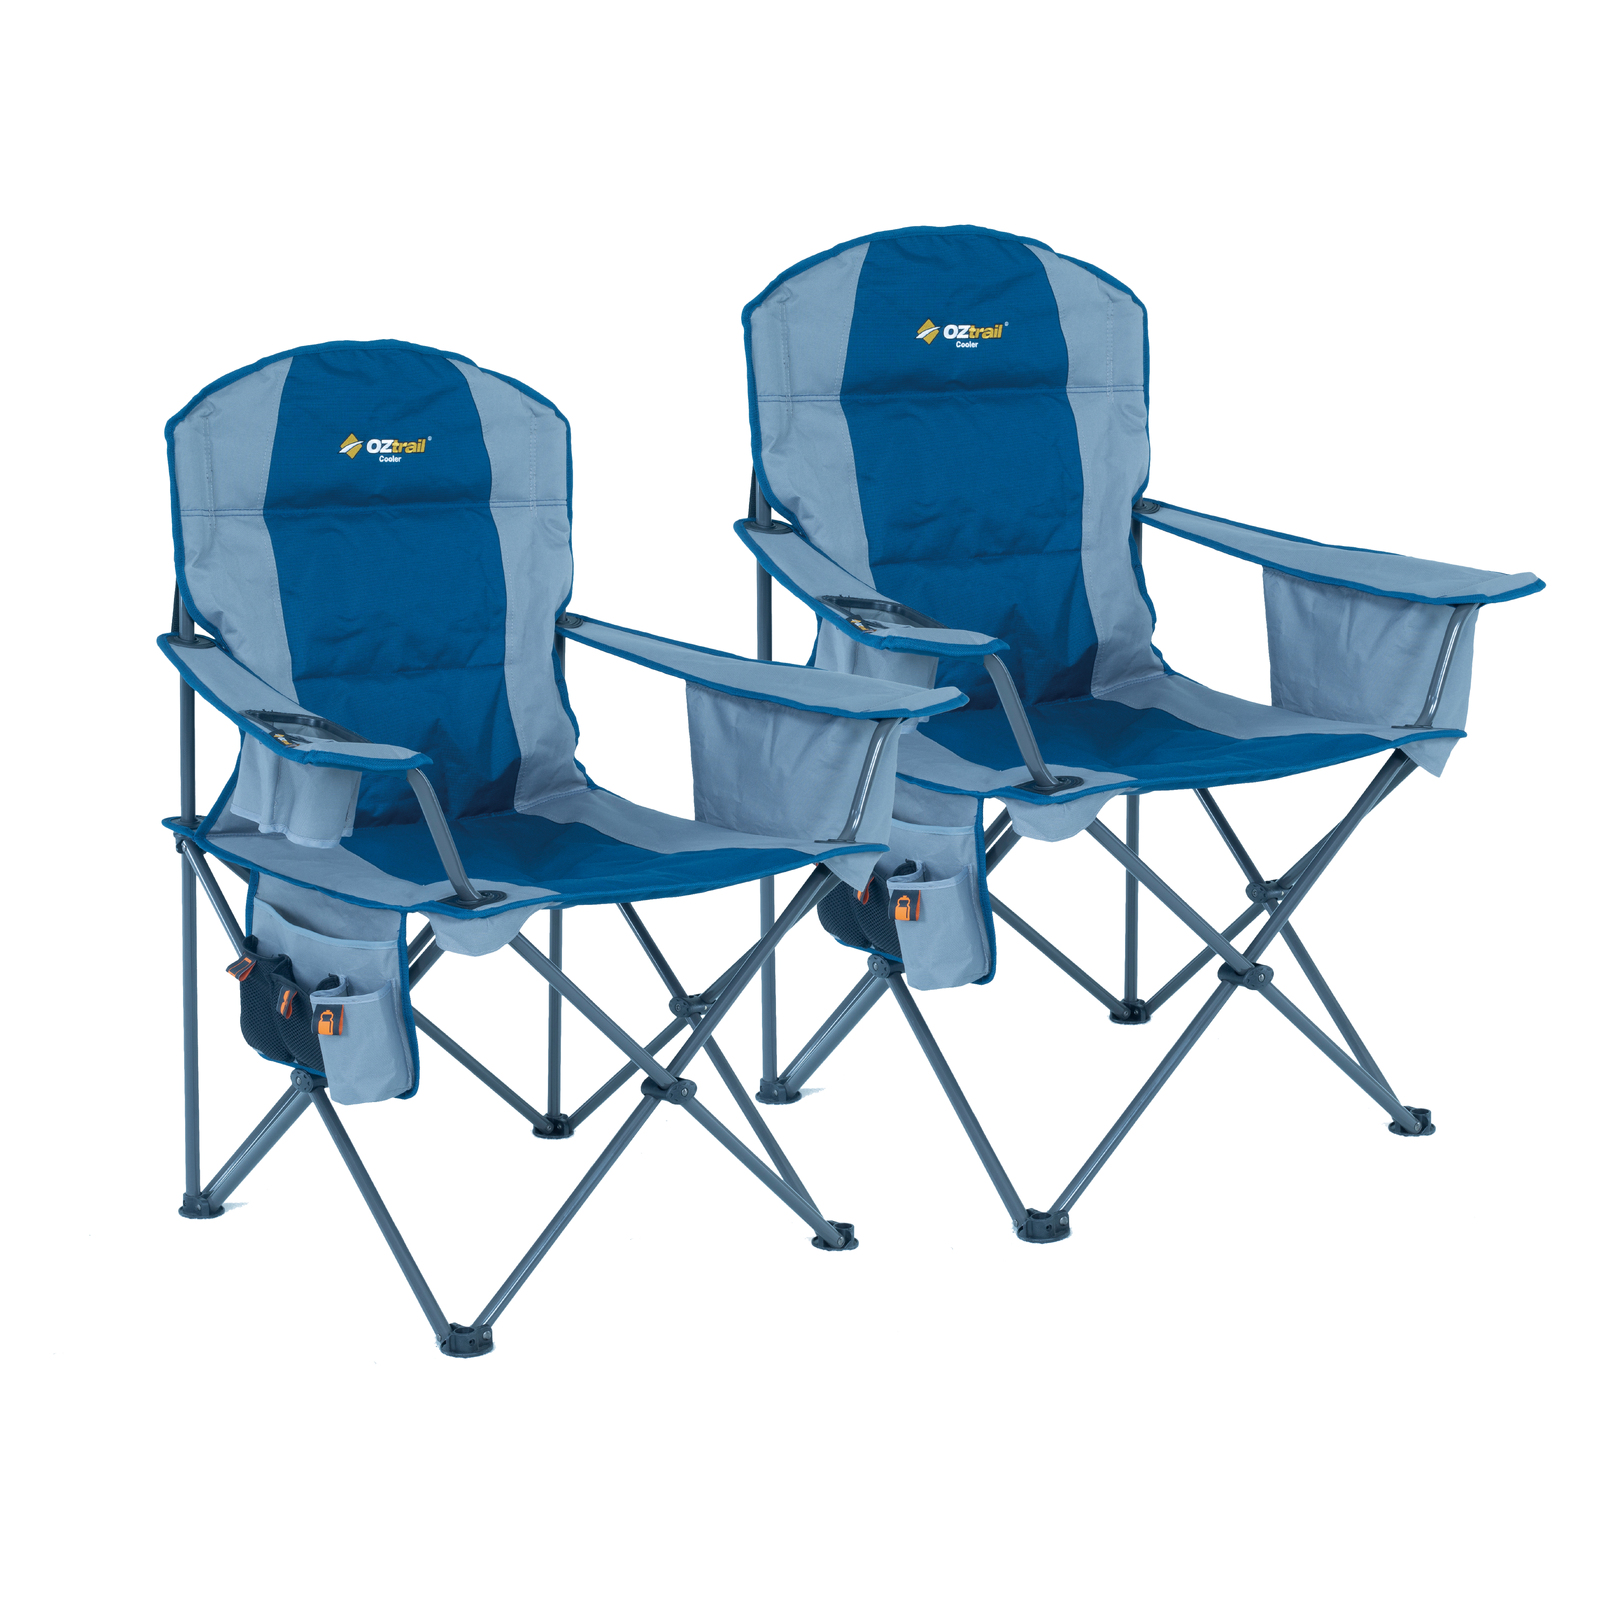 2 Cooler Armchairs Blue: Comfy Chill, Get Yours | Oztrail